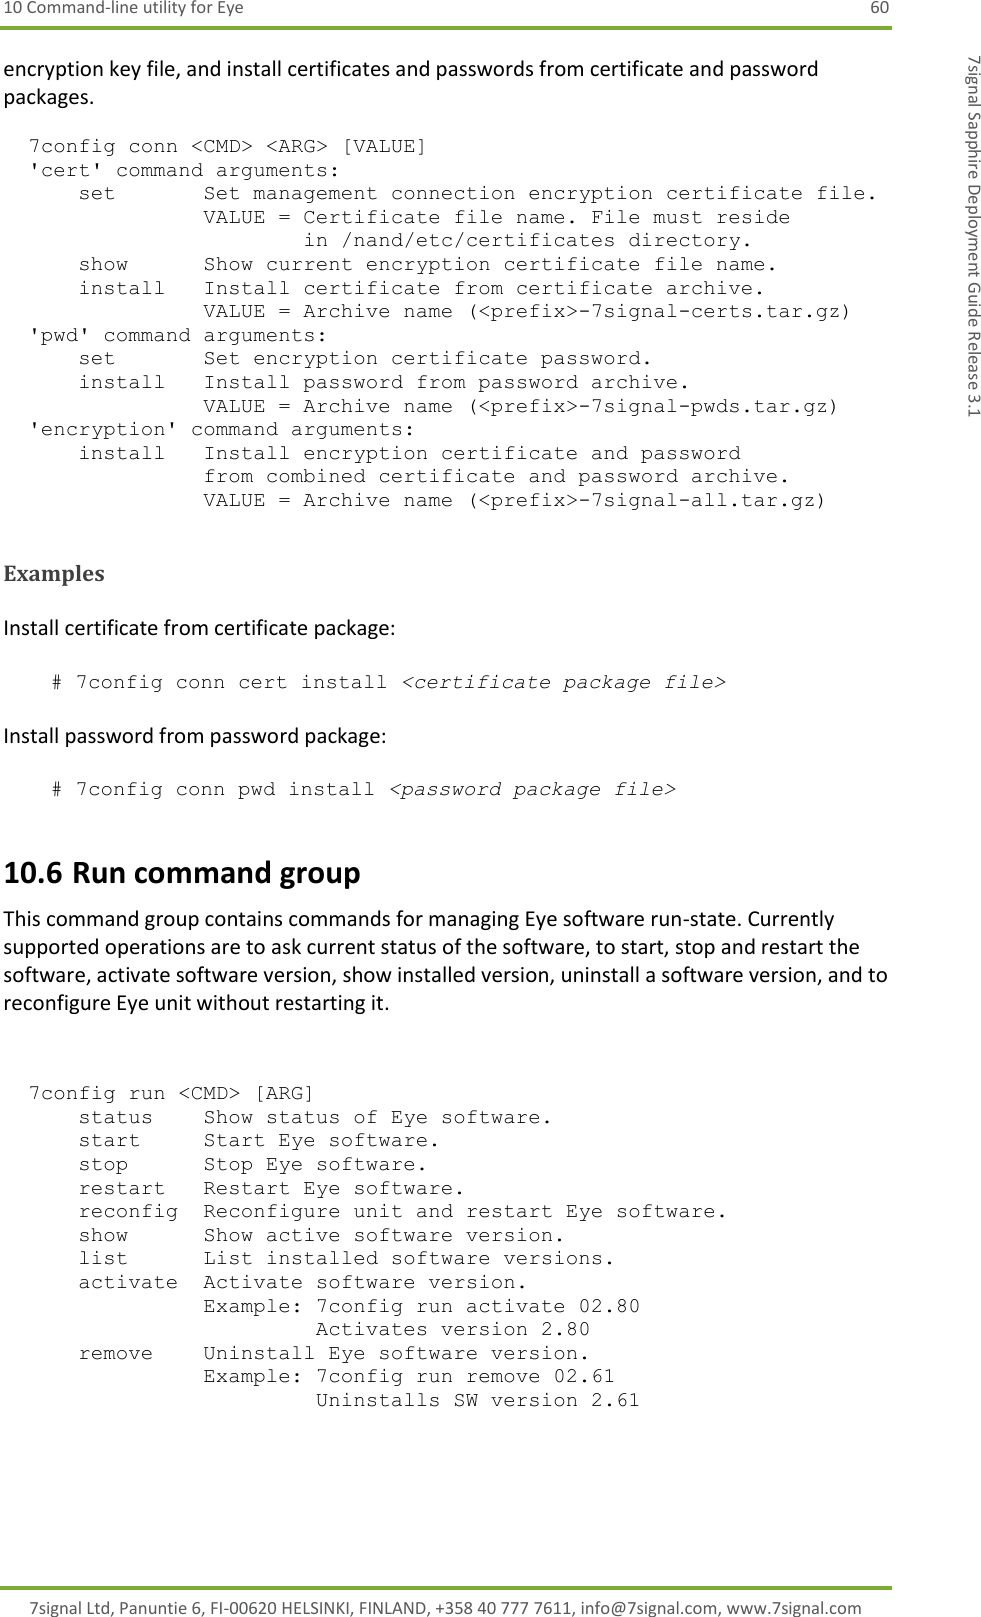 10 Command-line utility for Eye  60 7signal Ltd, Panuntie 6, FI-00620 HELSINKI, FINLAND, +358 40 777 7611, info@7signal.com, www.7signal.com 7signal Sapphire Deployment Guide Release 3.1 encryption key file, and install certificates and passwords from certificate and password packages.        7config conn &lt;CMD&gt; &lt;ARG&gt; [VALUE]   &apos;cert&apos; command arguments:       set       Set management connection encryption certificate file.                 VALUE = Certificate file name. File must reside                         in /nand/etc/certificates directory.       show      Show current encryption certificate file name.       install   Install certificate from certificate archive.                 VALUE = Archive name (&lt;prefix&gt;-7signal-certs.tar.gz)   &apos;pwd&apos; command arguments:       set       Set encryption certificate password.       install   Install password from password archive.                 VALUE = Archive name (&lt;prefix&gt;-7signal-pwds.tar.gz)   &apos;encryption&apos; command arguments:       install   Install encryption certificate and password                 from combined certificate and password archive.                 VALUE = Archive name (&lt;prefix&gt;-7signal-all.tar.gz)    Examples  Install certificate from certificate package:   # 7config conn cert install &lt;certificate package file&gt;  Install password from password package:   # 7config conn pwd install &lt;password package file&gt; 10.6 Run command group This command group contains commands for managing Eye software run-state. Currently supported operations are to ask current status of the software, to start, stop and restart the software, activate software version, show installed version, uninstall a software version, and to reconfigure Eye unit without restarting it.         7config run &lt;CMD&gt; [ARG]       status    Show status of Eye software.       start     Start Eye software.       stop      Stop Eye software.       restart   Restart Eye software.       reconfig  Reconfigure unit and restart Eye software.       show      Show active software version.       list      List installed software versions.       activate  Activate software version.                 Example: 7config run activate 02.80                          Activates version 2.80       remove    Uninstall Eye software version.                 Example: 7config run remove 02.61                          Uninstalls SW version 2.61    